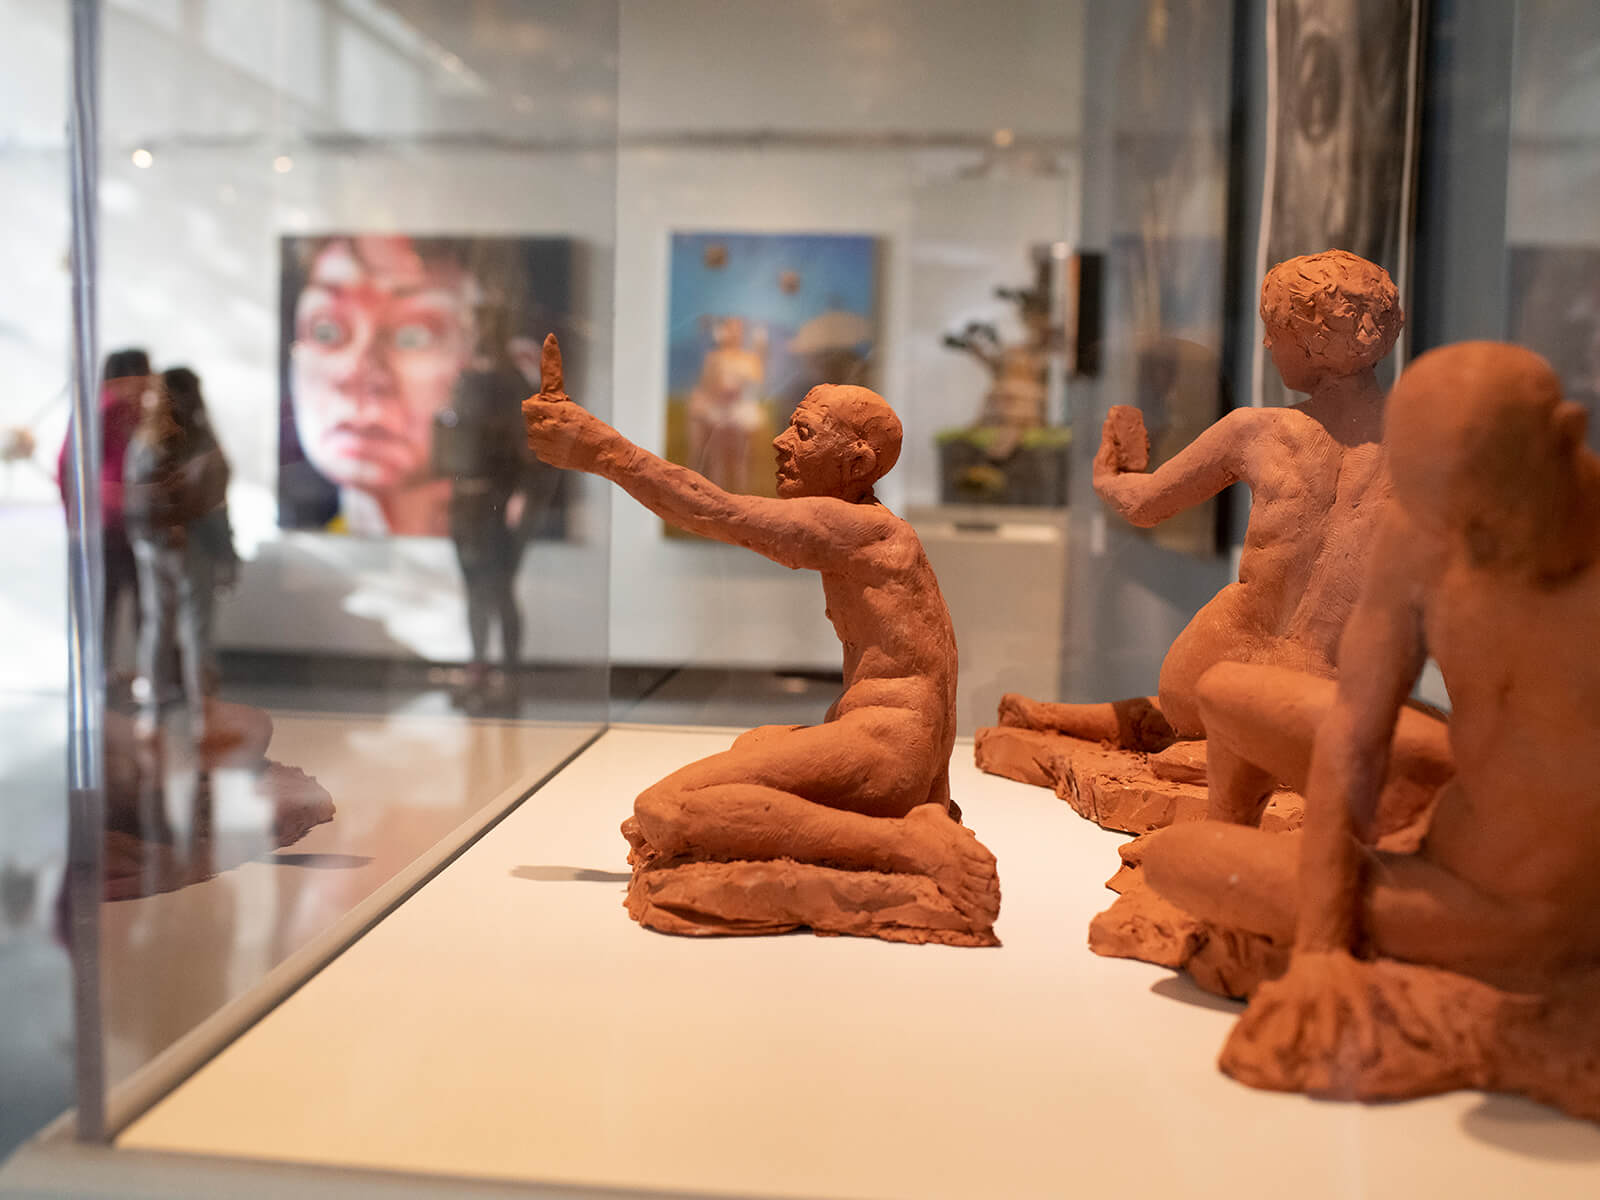 Three terracotta figure sculptures by Alecia Rossano on display at the Bellevue Art Museum.